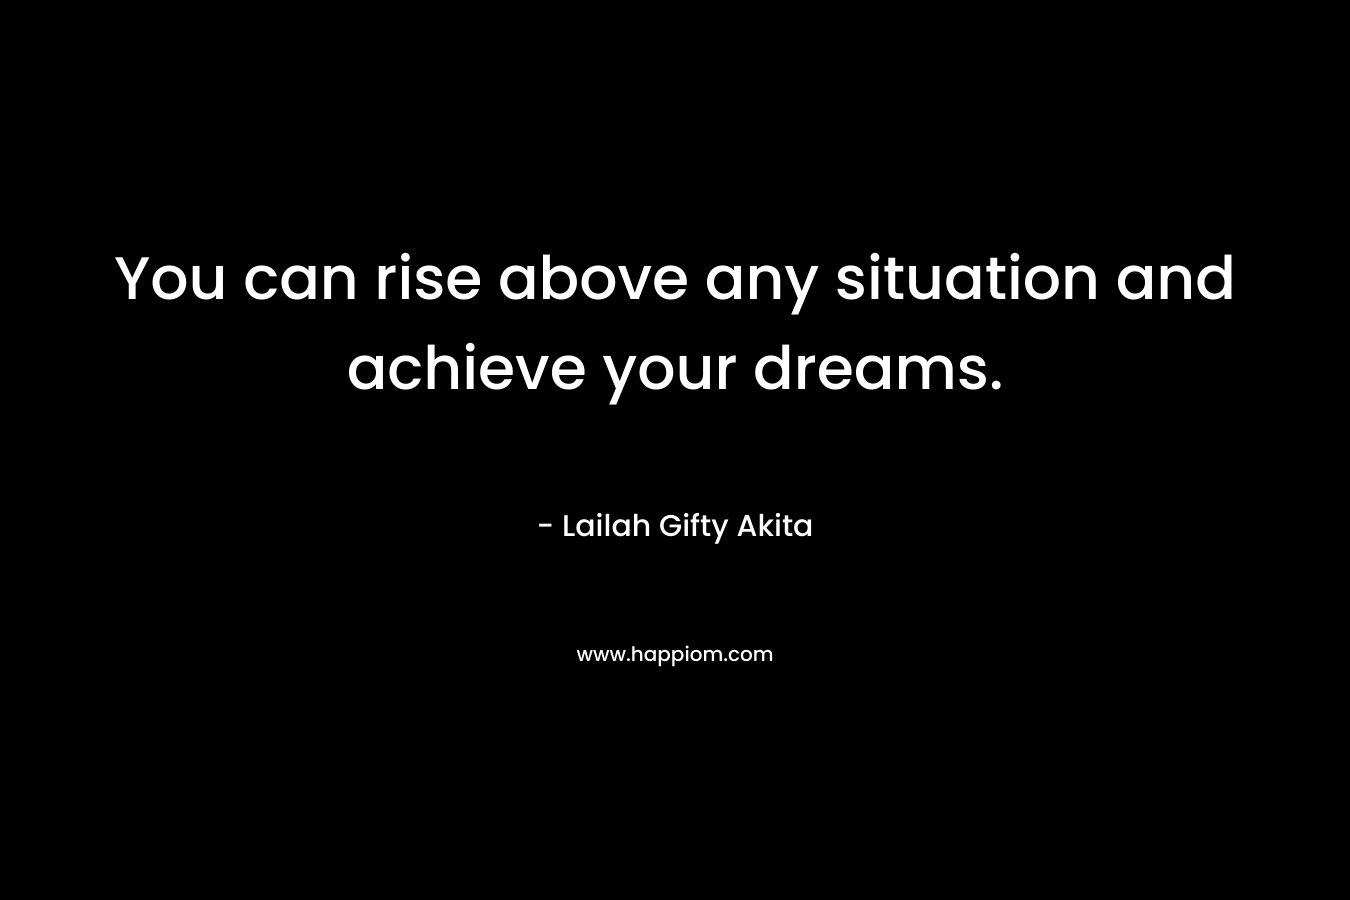 You can rise above any situation and achieve your dreams.